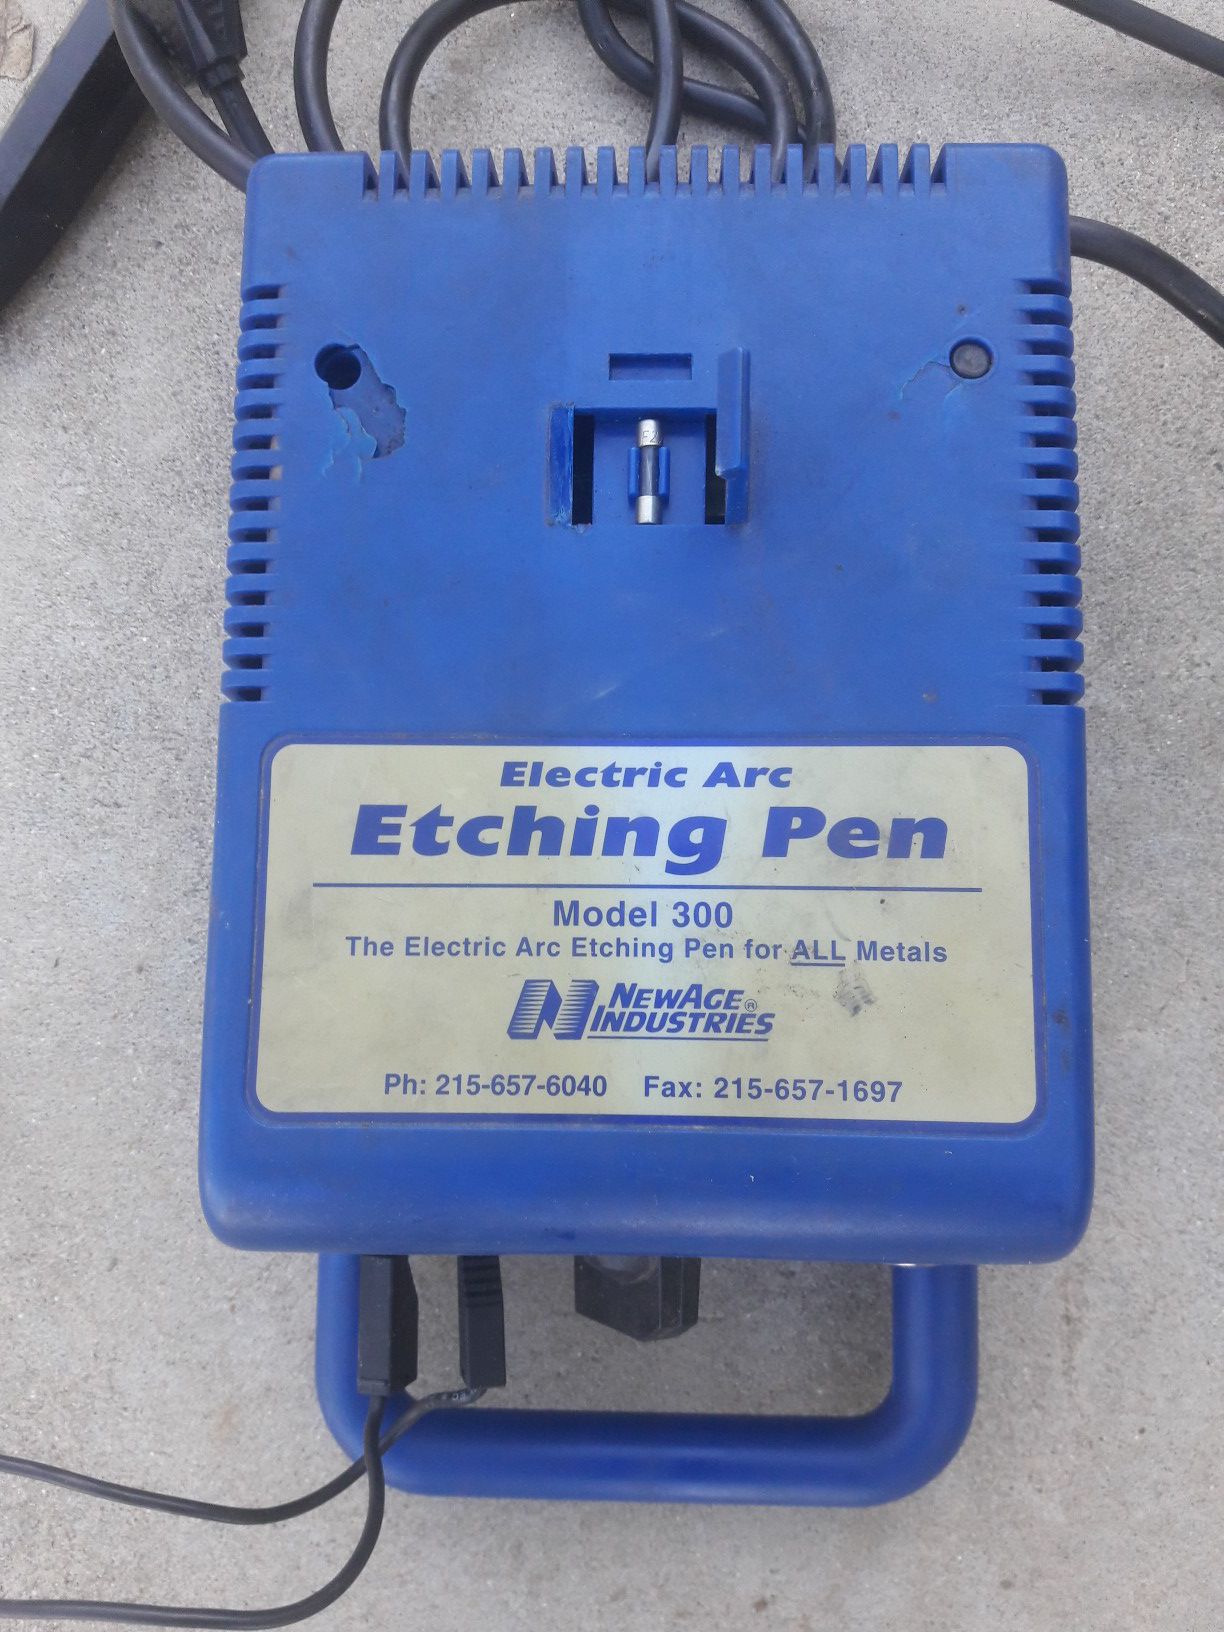 ETCHING PEN ELECTRIC ARC for Sale in San Diego, CA - OfferUp